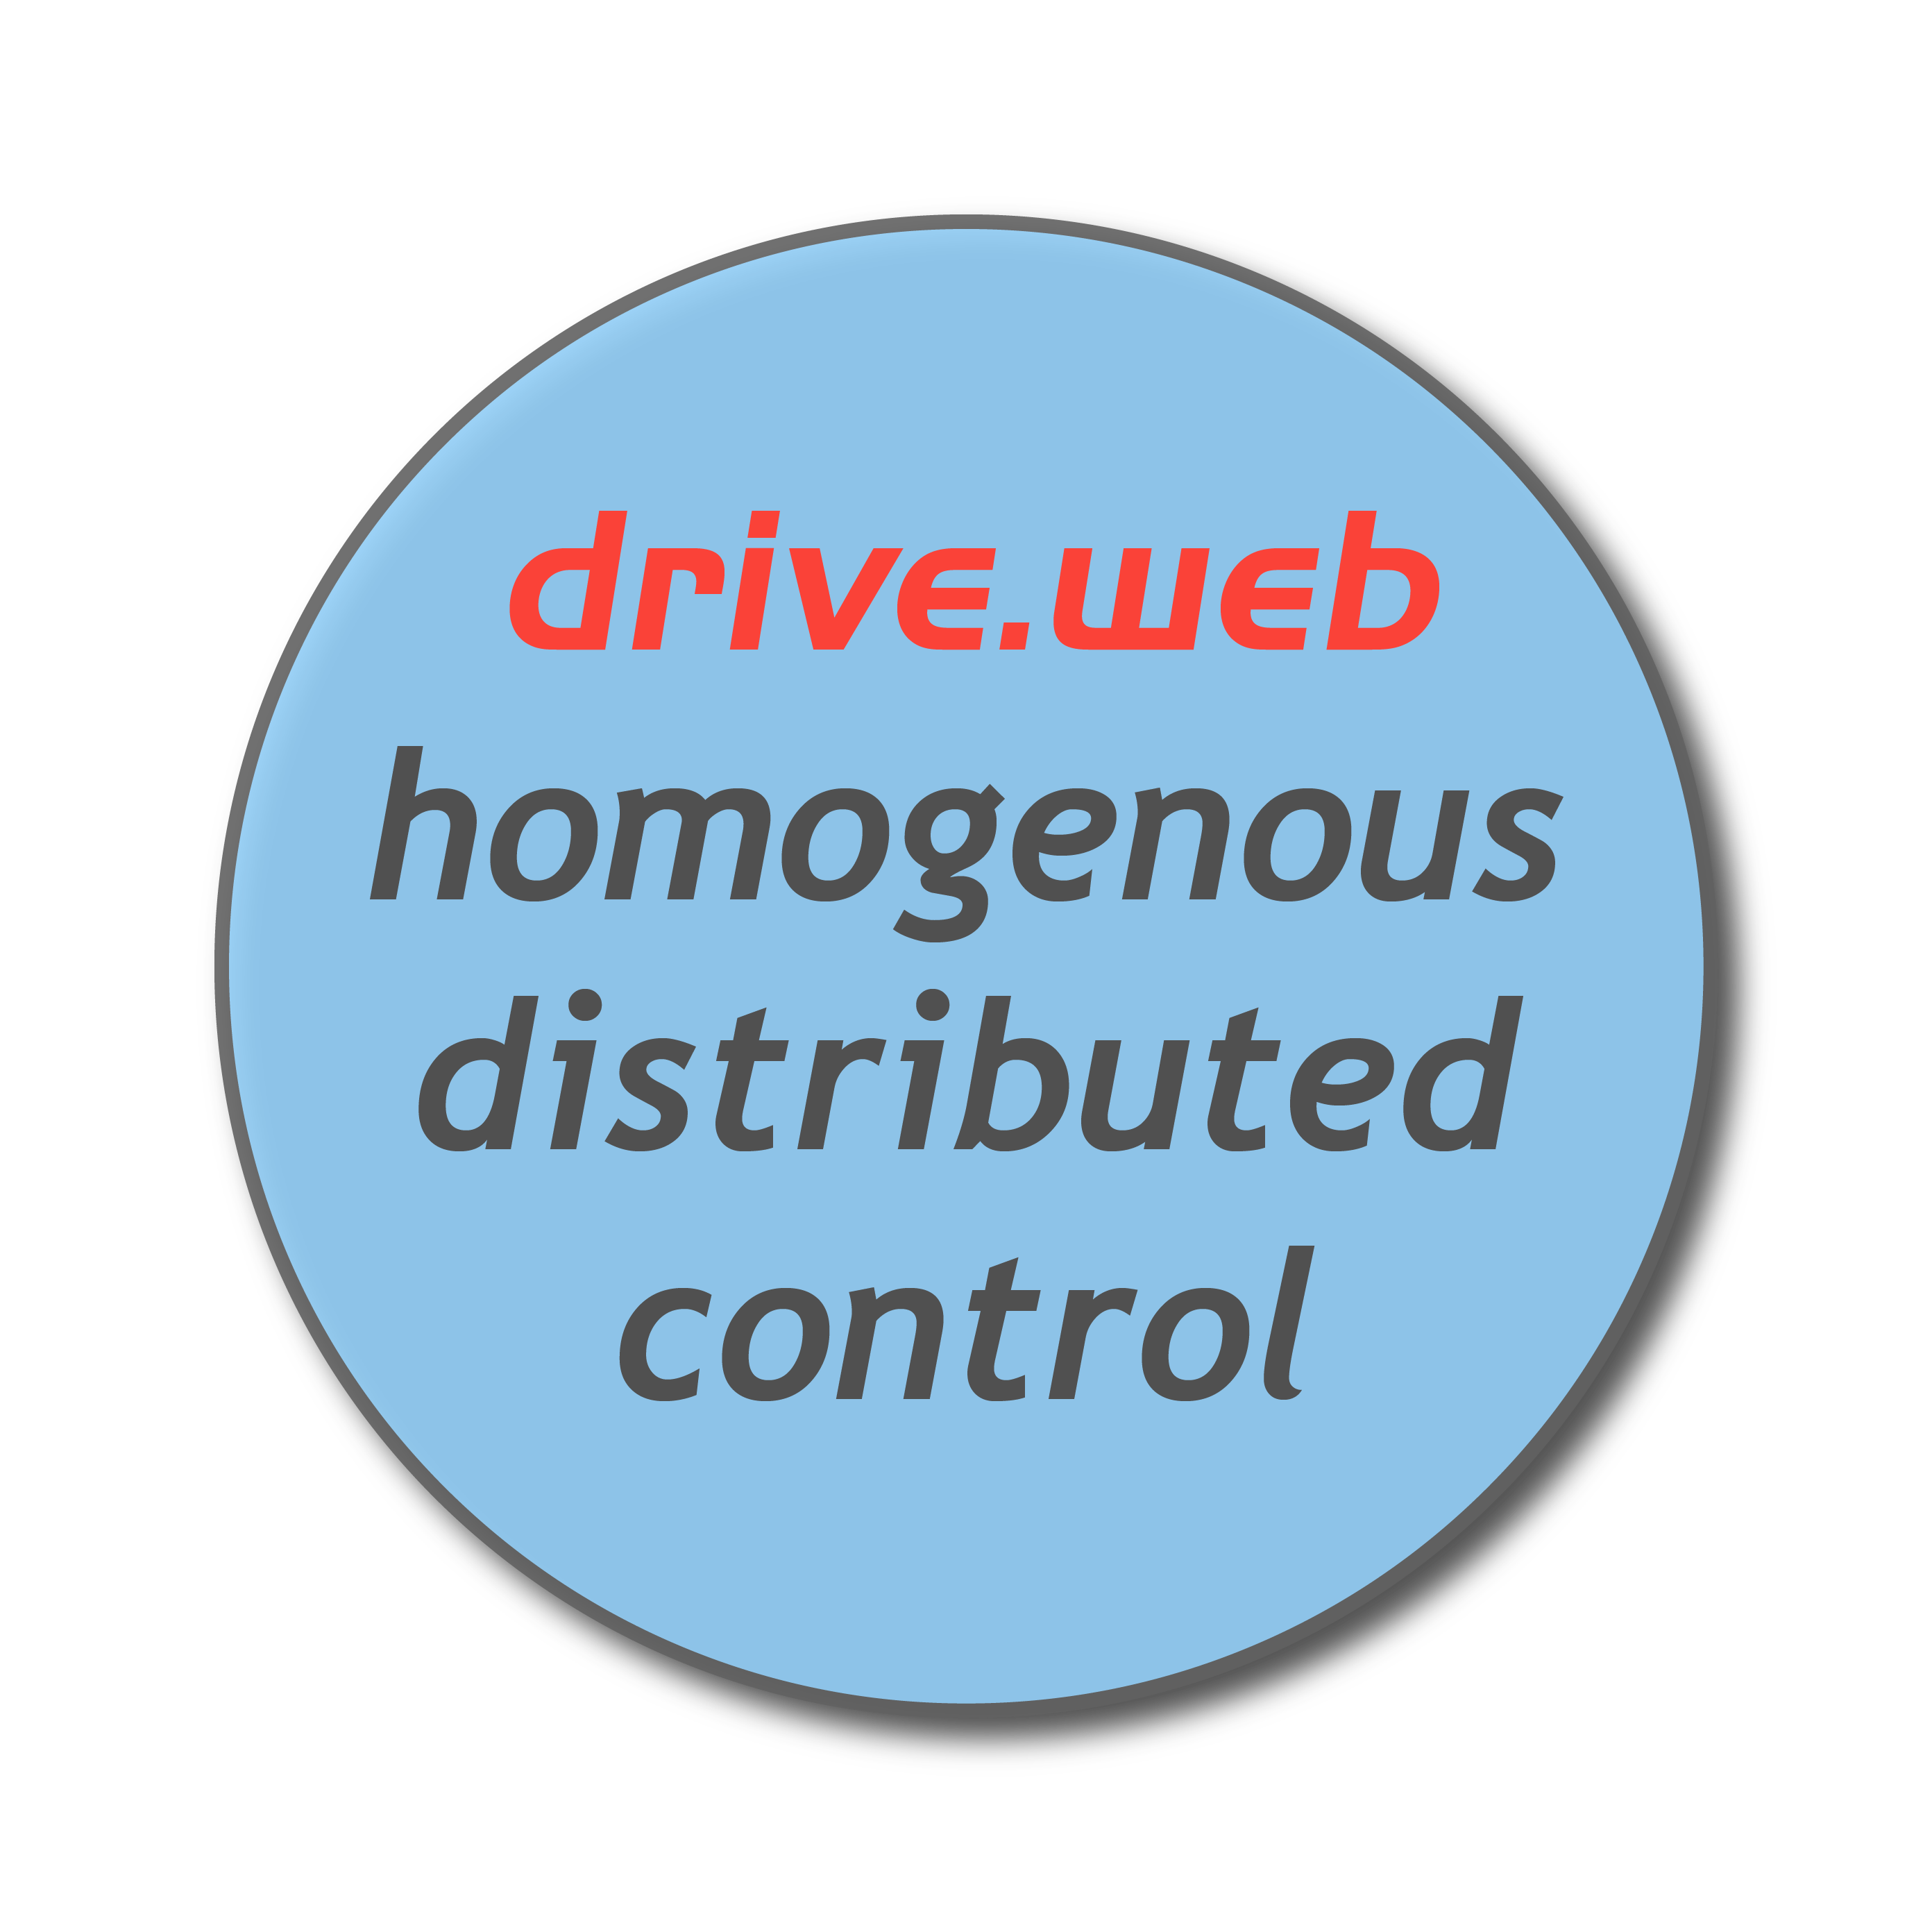 drive.web devices connect peer to peer over Ethernet to form a completely homogeneous control environment